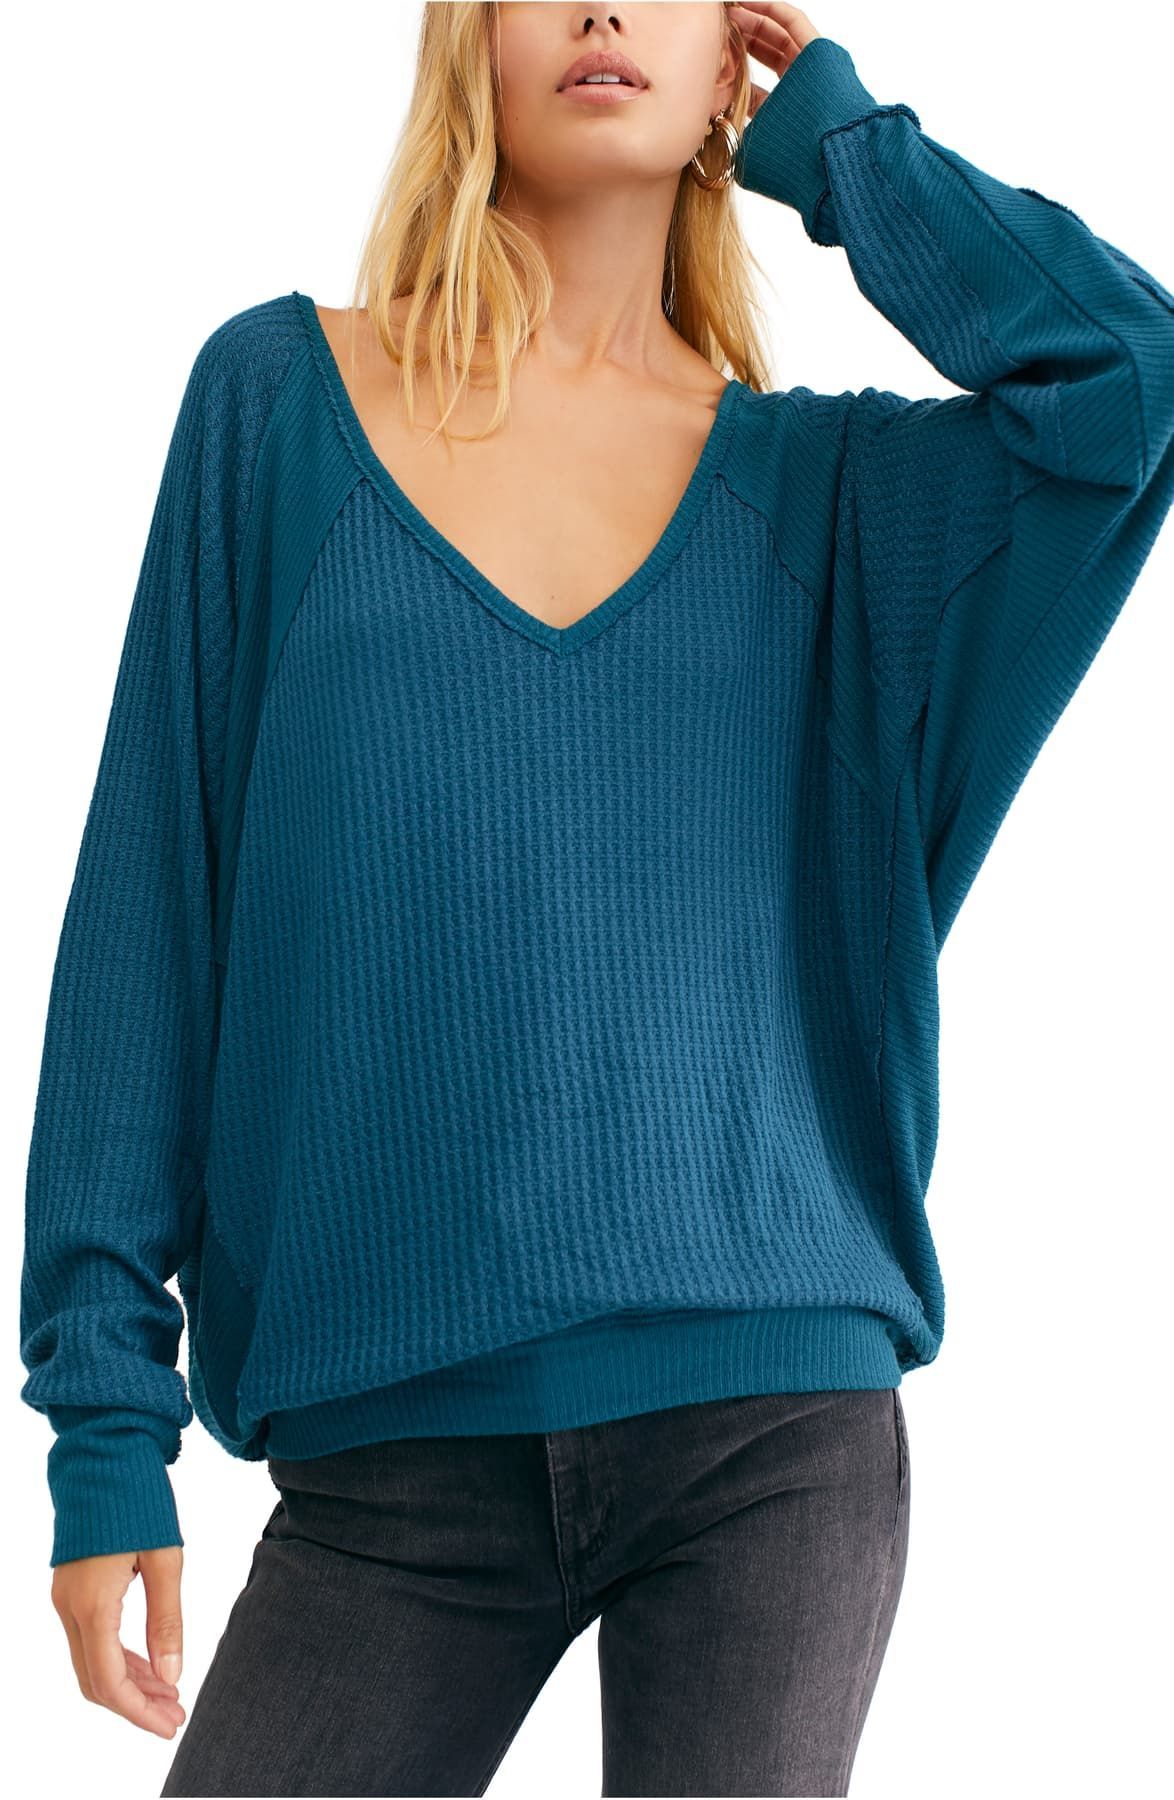 Color: Blues Size Type: Regular Size (Women's): XS Sleeve Length: Long Sleeve Type: Blouse Style: Knit Top Neckline: V-Neck Pattern: Solid Theme: Classic Material: Rayon